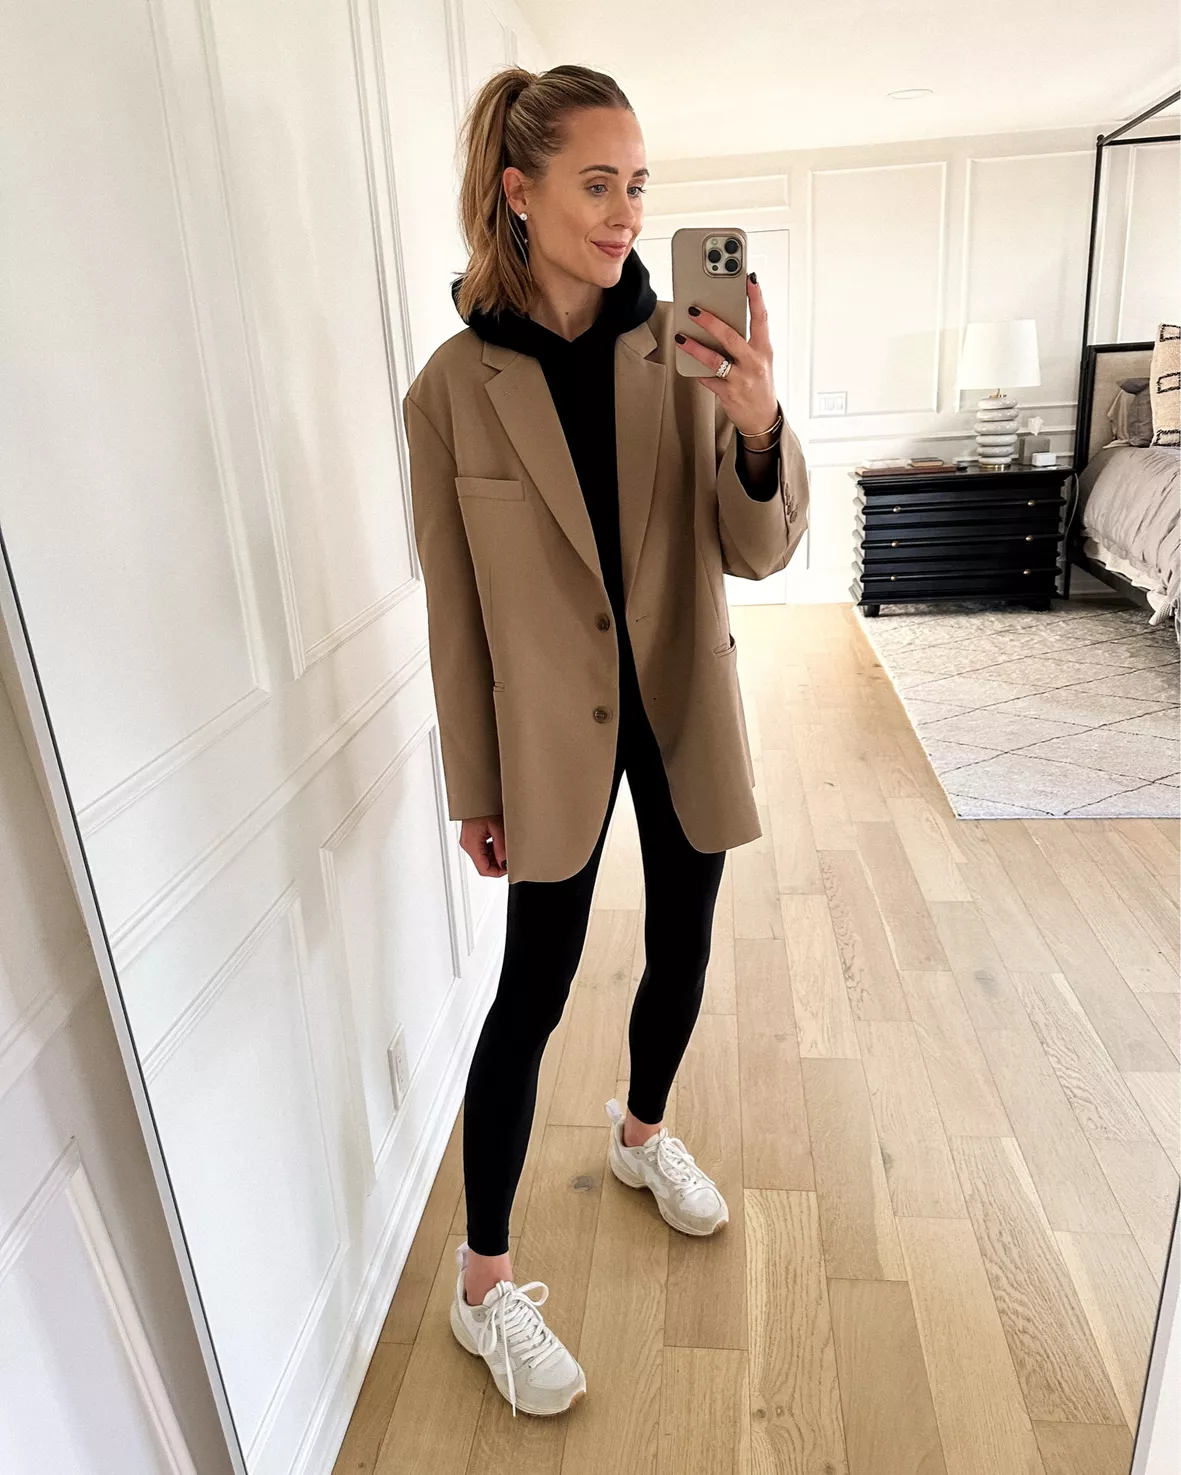 How to Style a Beige Blazer for a Casual Spring Outfit - Fashion Jackson